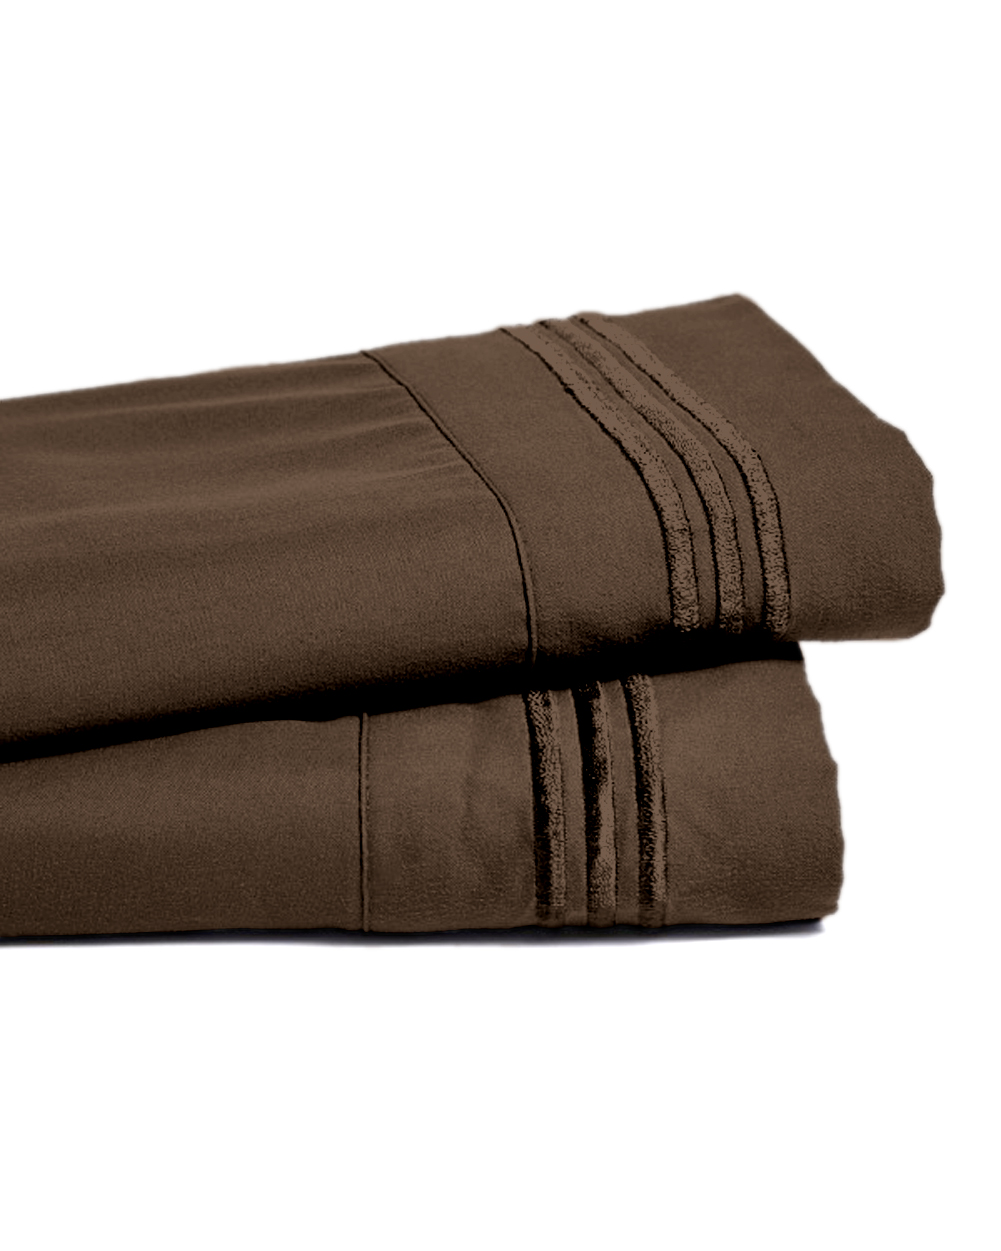 Deep Pocket Bamboo Bed Sheet - Luxury 2200 Embroidered Wrinkle, Fade and Stain Resistant Sheets - Chocolate Full Size